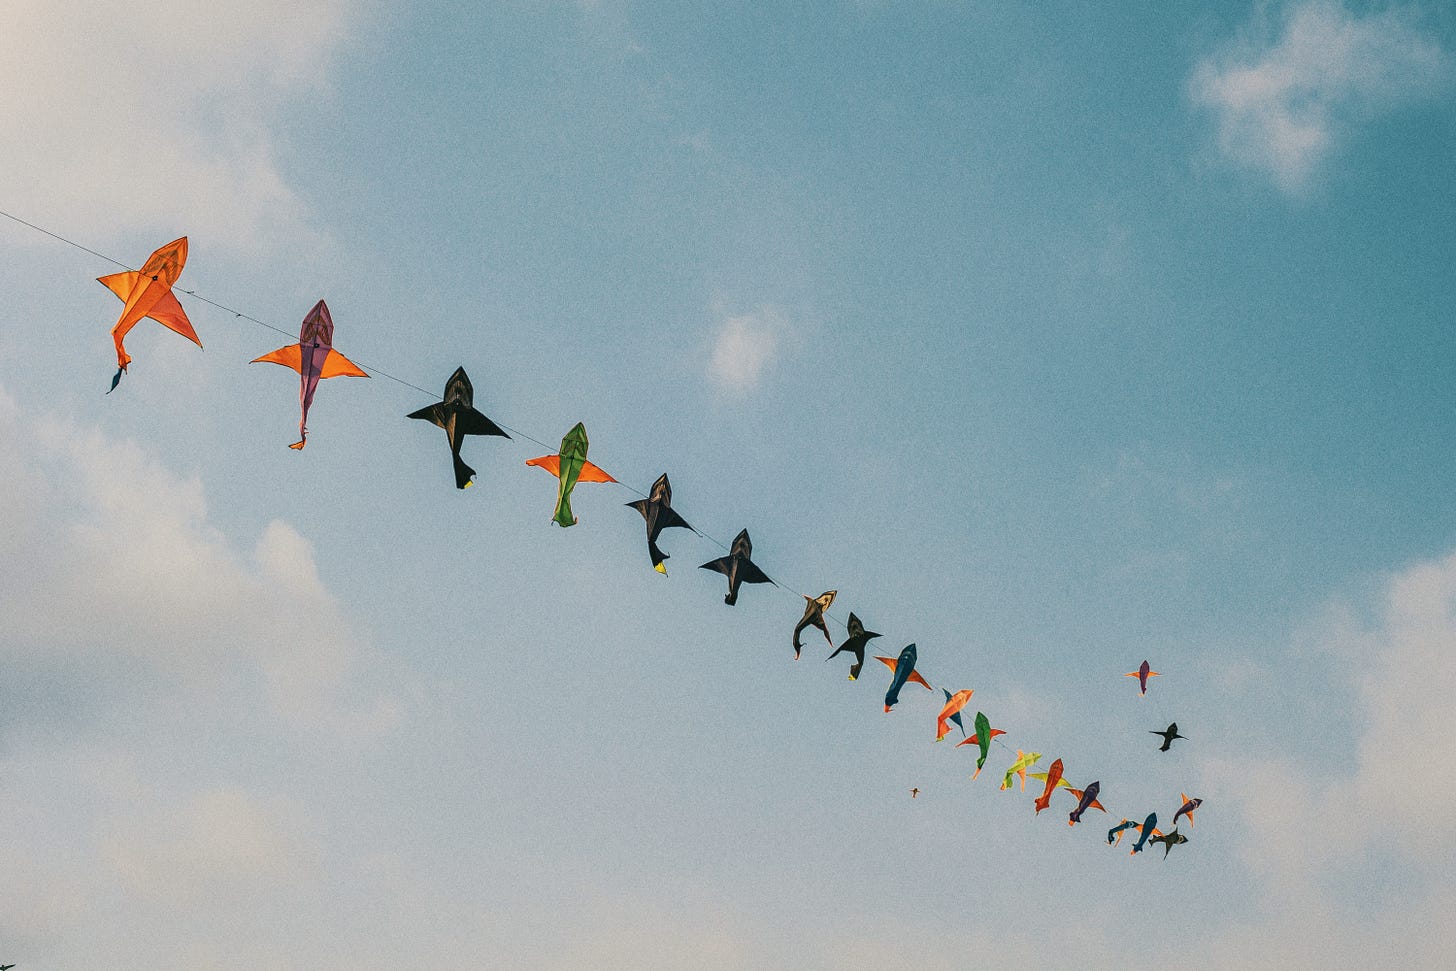 A string of fish-shaped kites floating in the sky.